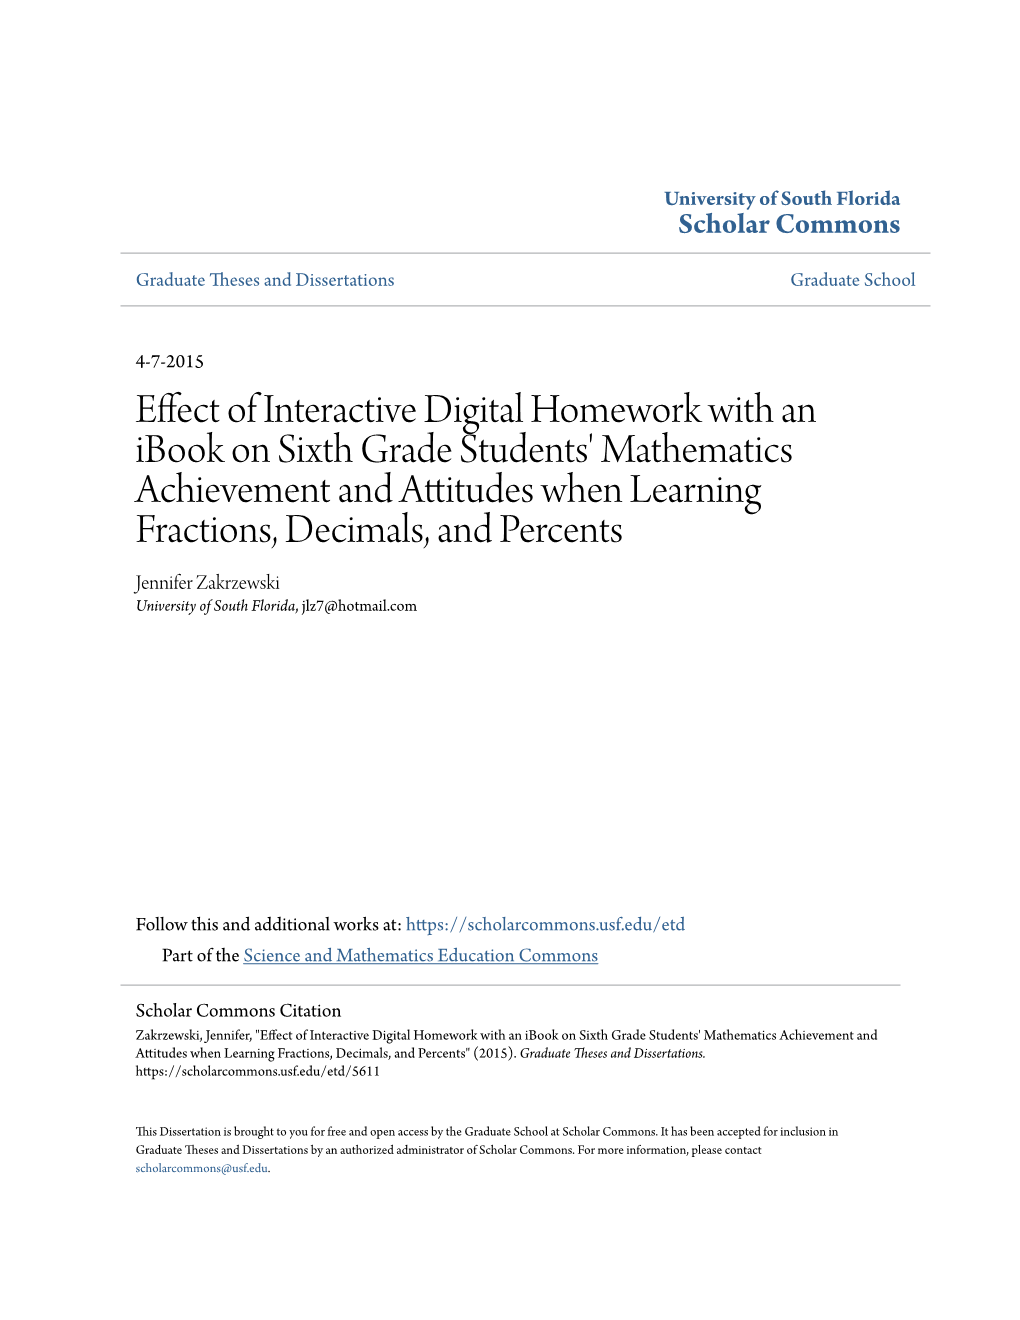 Effect of Interactive Digital Homework with an Ibook on Sixth Grade